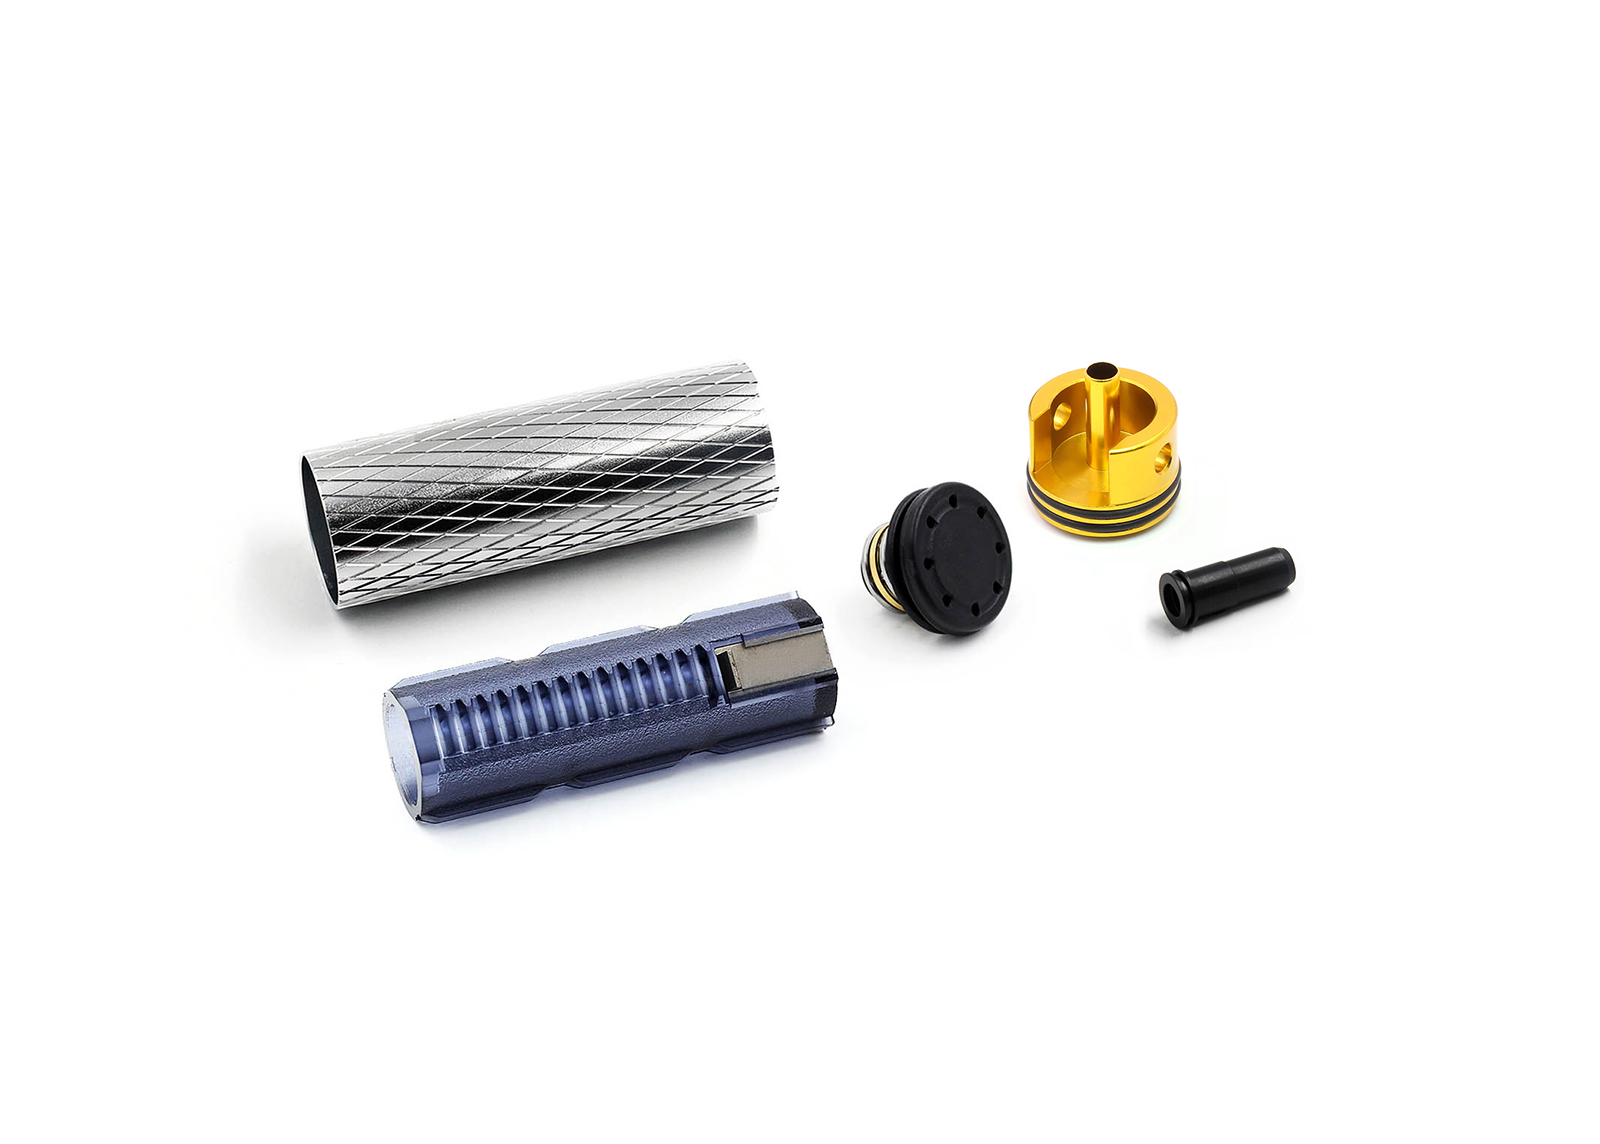 Cylinder Set for M16-A2 - Modify Airsoft parts